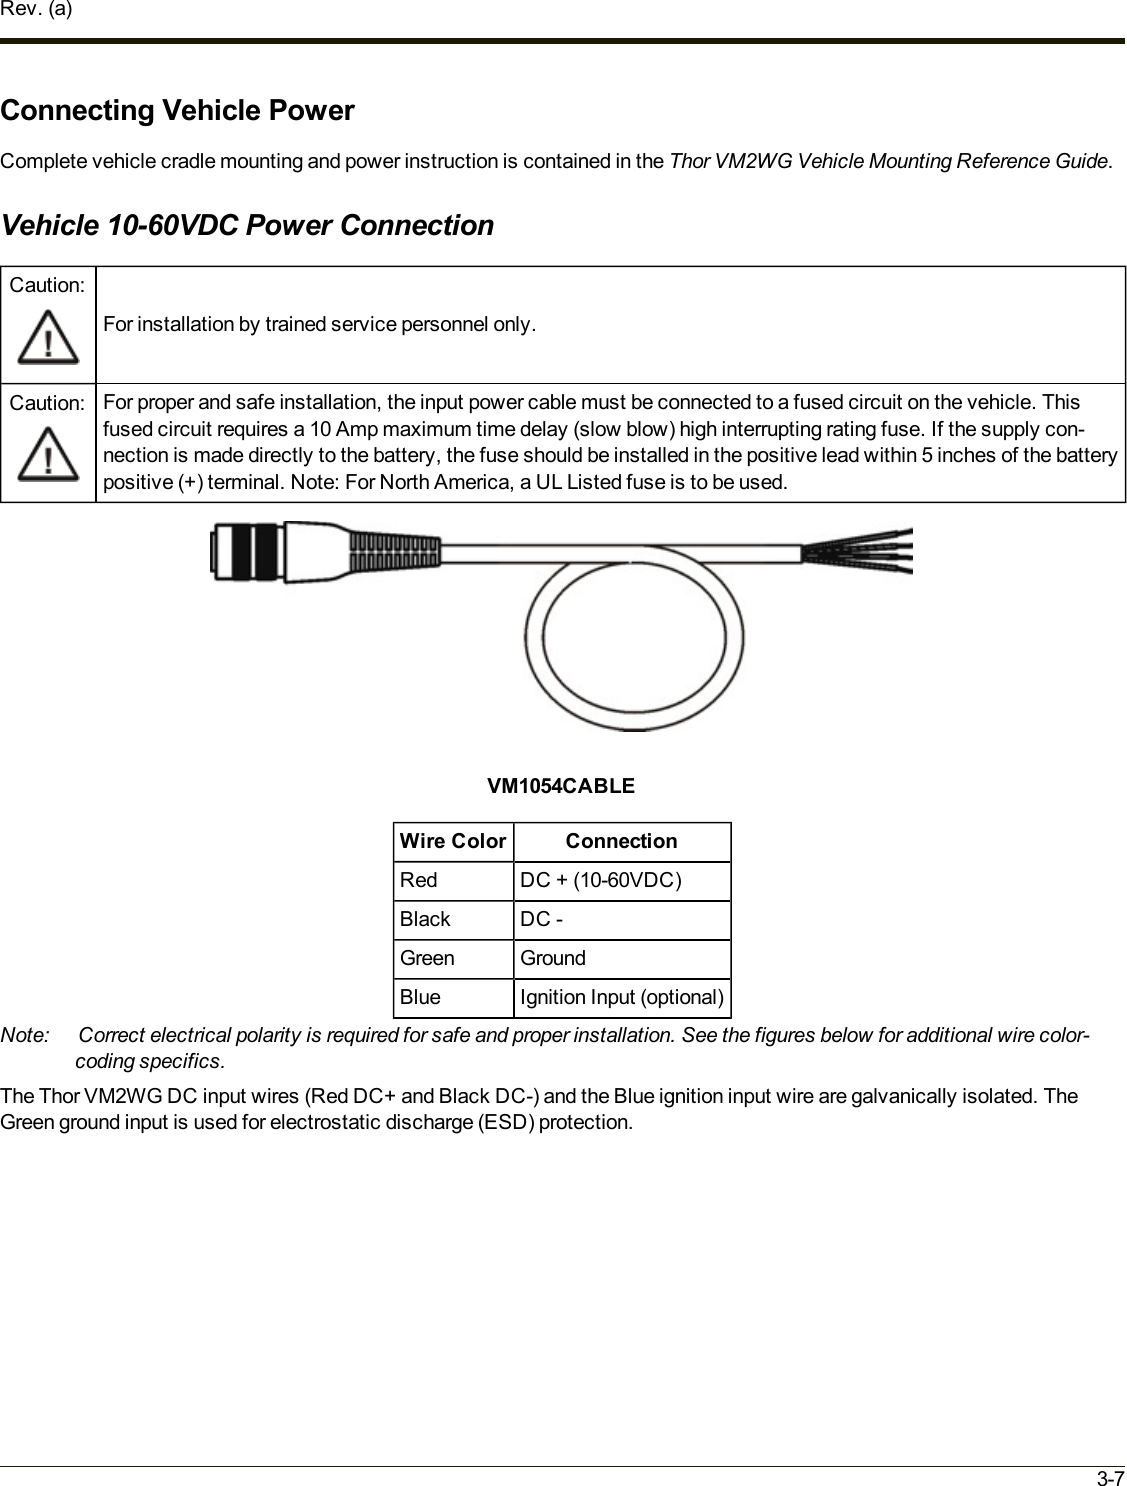 Rev. (a)Connecting Vehicle PowerComplete vehicle cradle mounting and power instruction is contained in the Thor VM2WG Vehicle Mounting Reference Guide.Vehicle 10-60VDC Power ConnectionCaution:For installation by trained service personnel only.Caution: For proper and safe installation, the input power cable must be connected to a fused circuit on the vehicle. Thisfused circuit requires a 10 Amp maximum time delay (slow blow) high interrupting rating fuse. If the supply con-nection is made directly to the battery, the fuse should be installed in the positive lead within 5 inches of the batterypositive (+) terminal. Note: For North America, a UL Listed fuse is to be used.VM1054CABLEWire Color ConnectionRed DC + (10-60VDC)Black DC -Green GroundBlue Ignition Input (optional)Note: Correct electrical polarity is required for safe and proper installation. See the figures below for additional wire color-coding specifics.The Thor VM2WG DC input wires (Red DC+ and Black DC-) and the Blue ignition input wire are galvanically isolated. TheGreen ground input is used for electrostatic discharge (ESD) protection.3-7